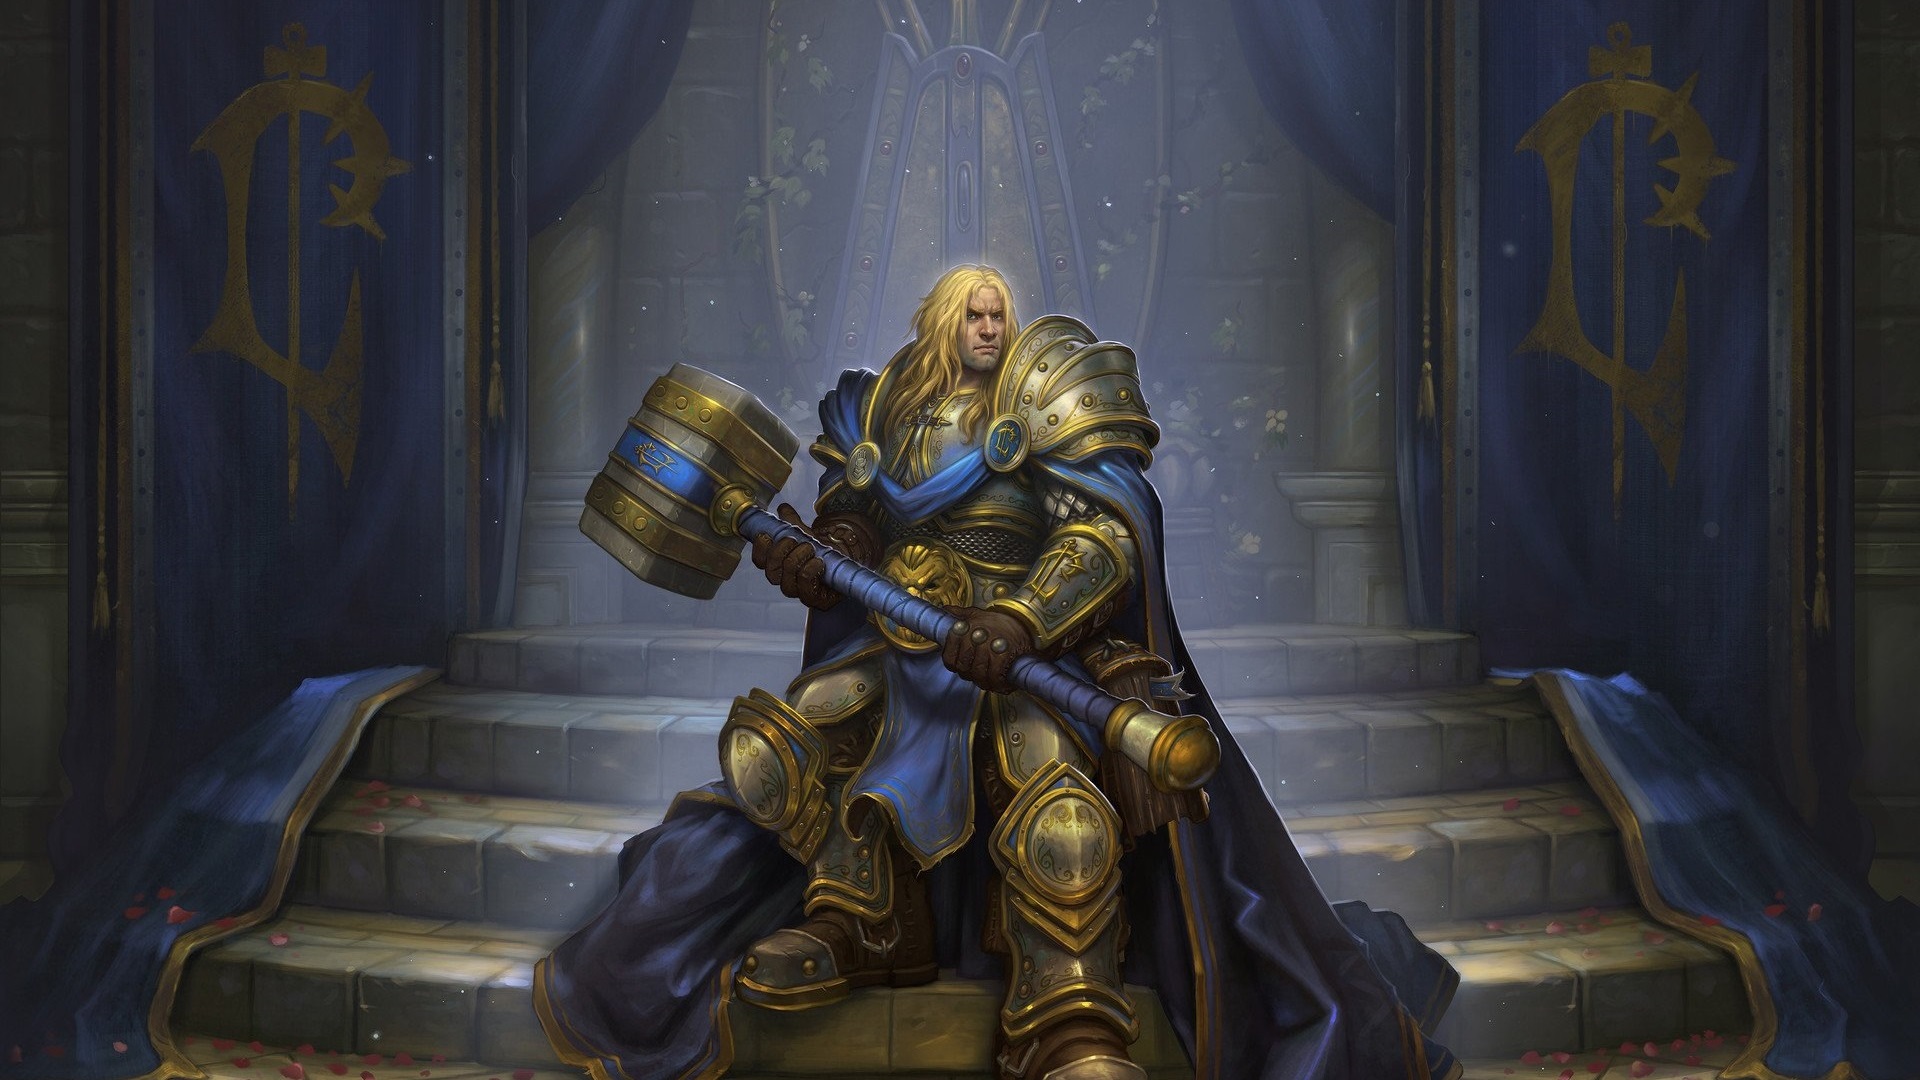 Hearthstone Heroes Of Warcraft Arthas Warcraft Warcraft Iii Reign Of Chaos Prince Video Games Arthas 1920x1080